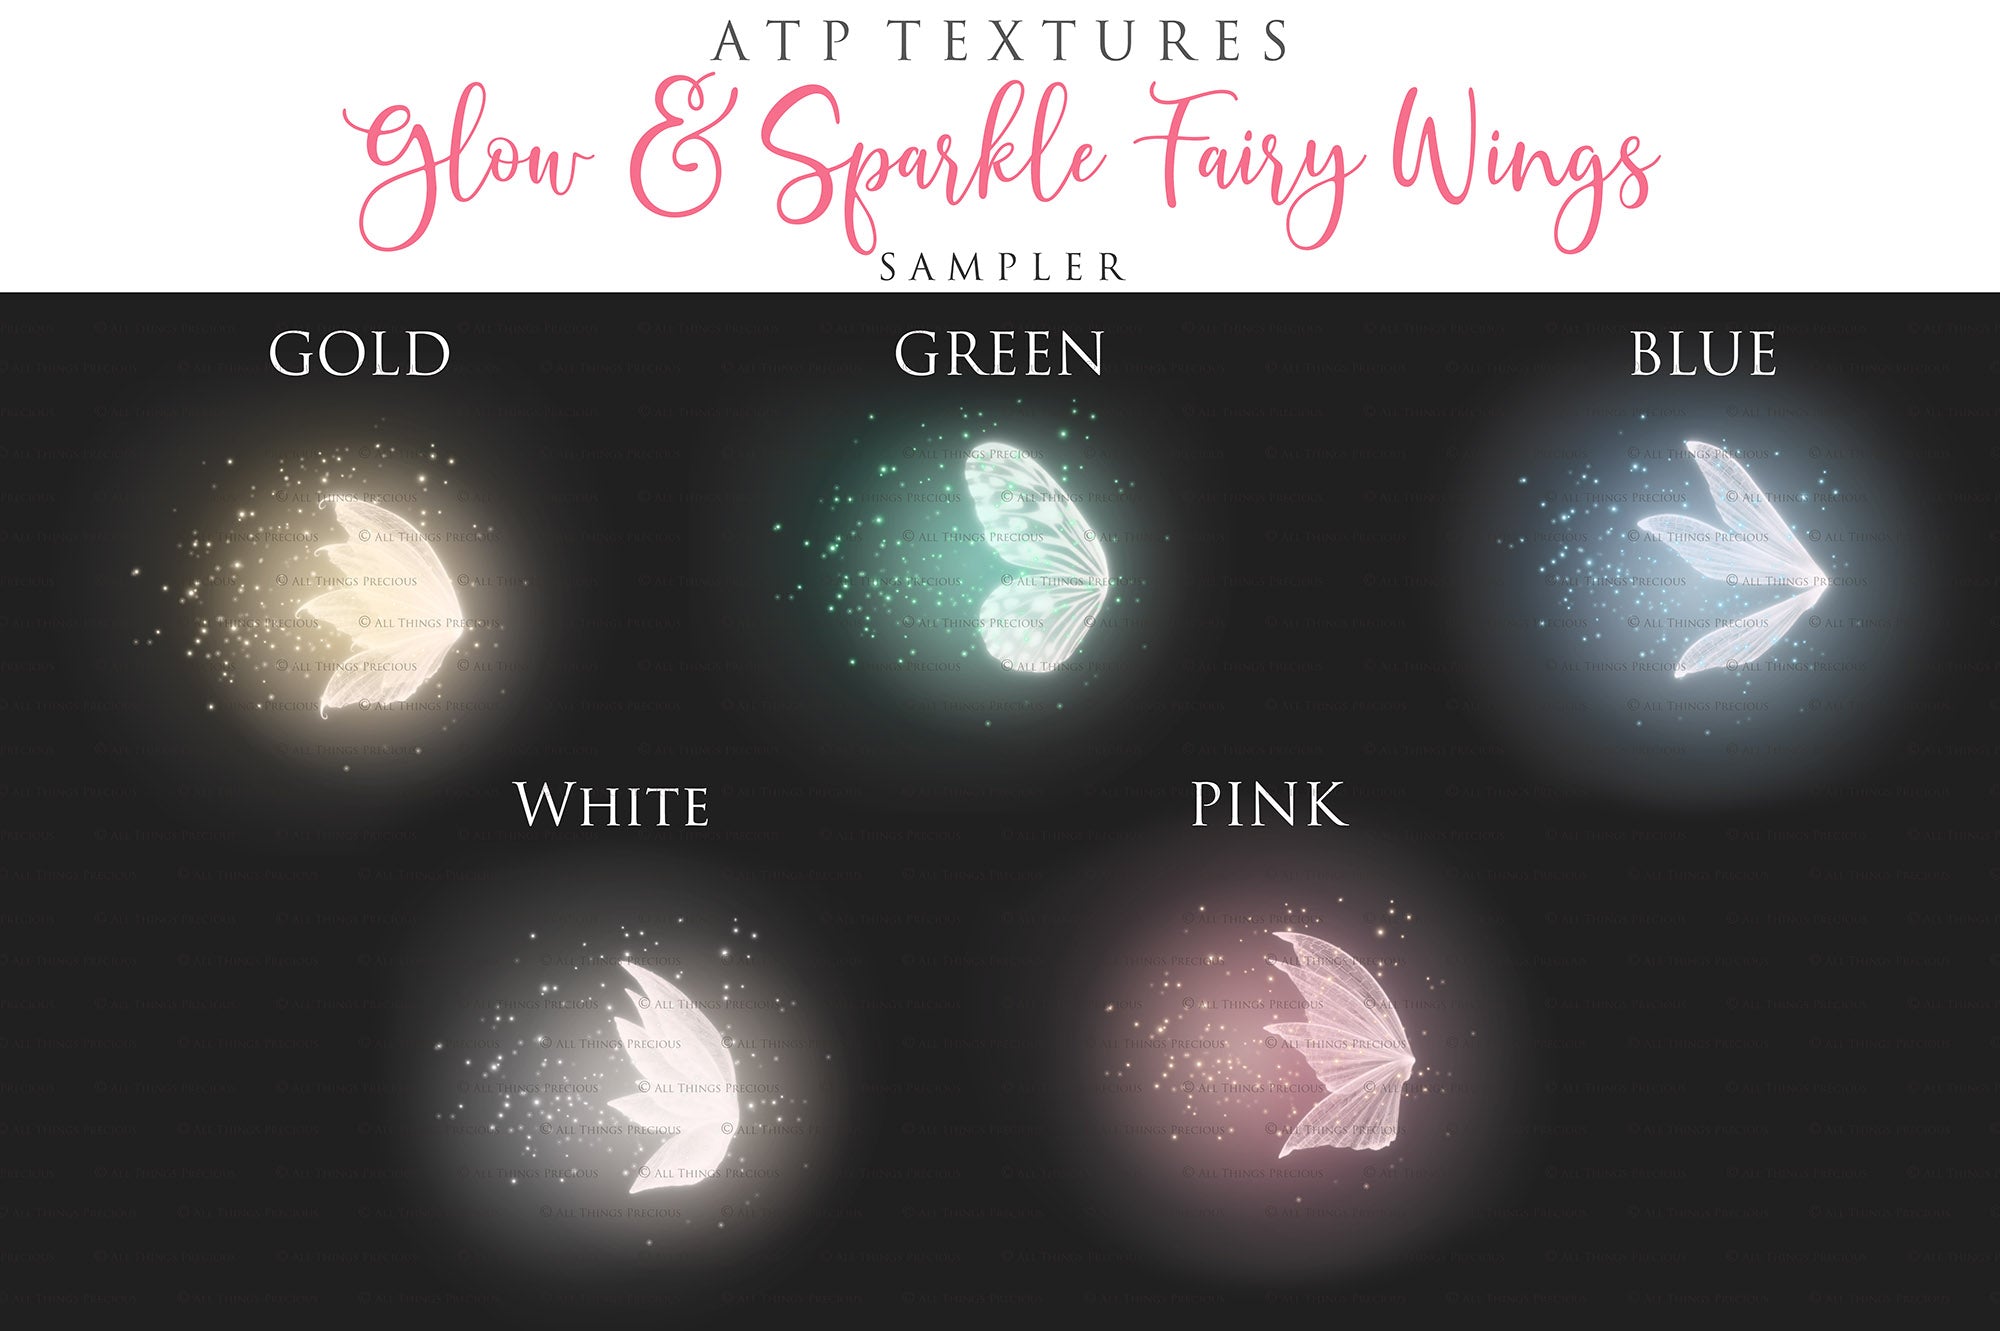 Fairy Wing Overlays For Photographers, Photoshop, Digital art and Creatives. Transparent, high resolution, faery wings for photography! These are gorgeous PNG overlays for fantasy digital art and Child portraiture. White fairy wings. Photo Overlays. Digital download. Graphic effects. Assets for photographers.